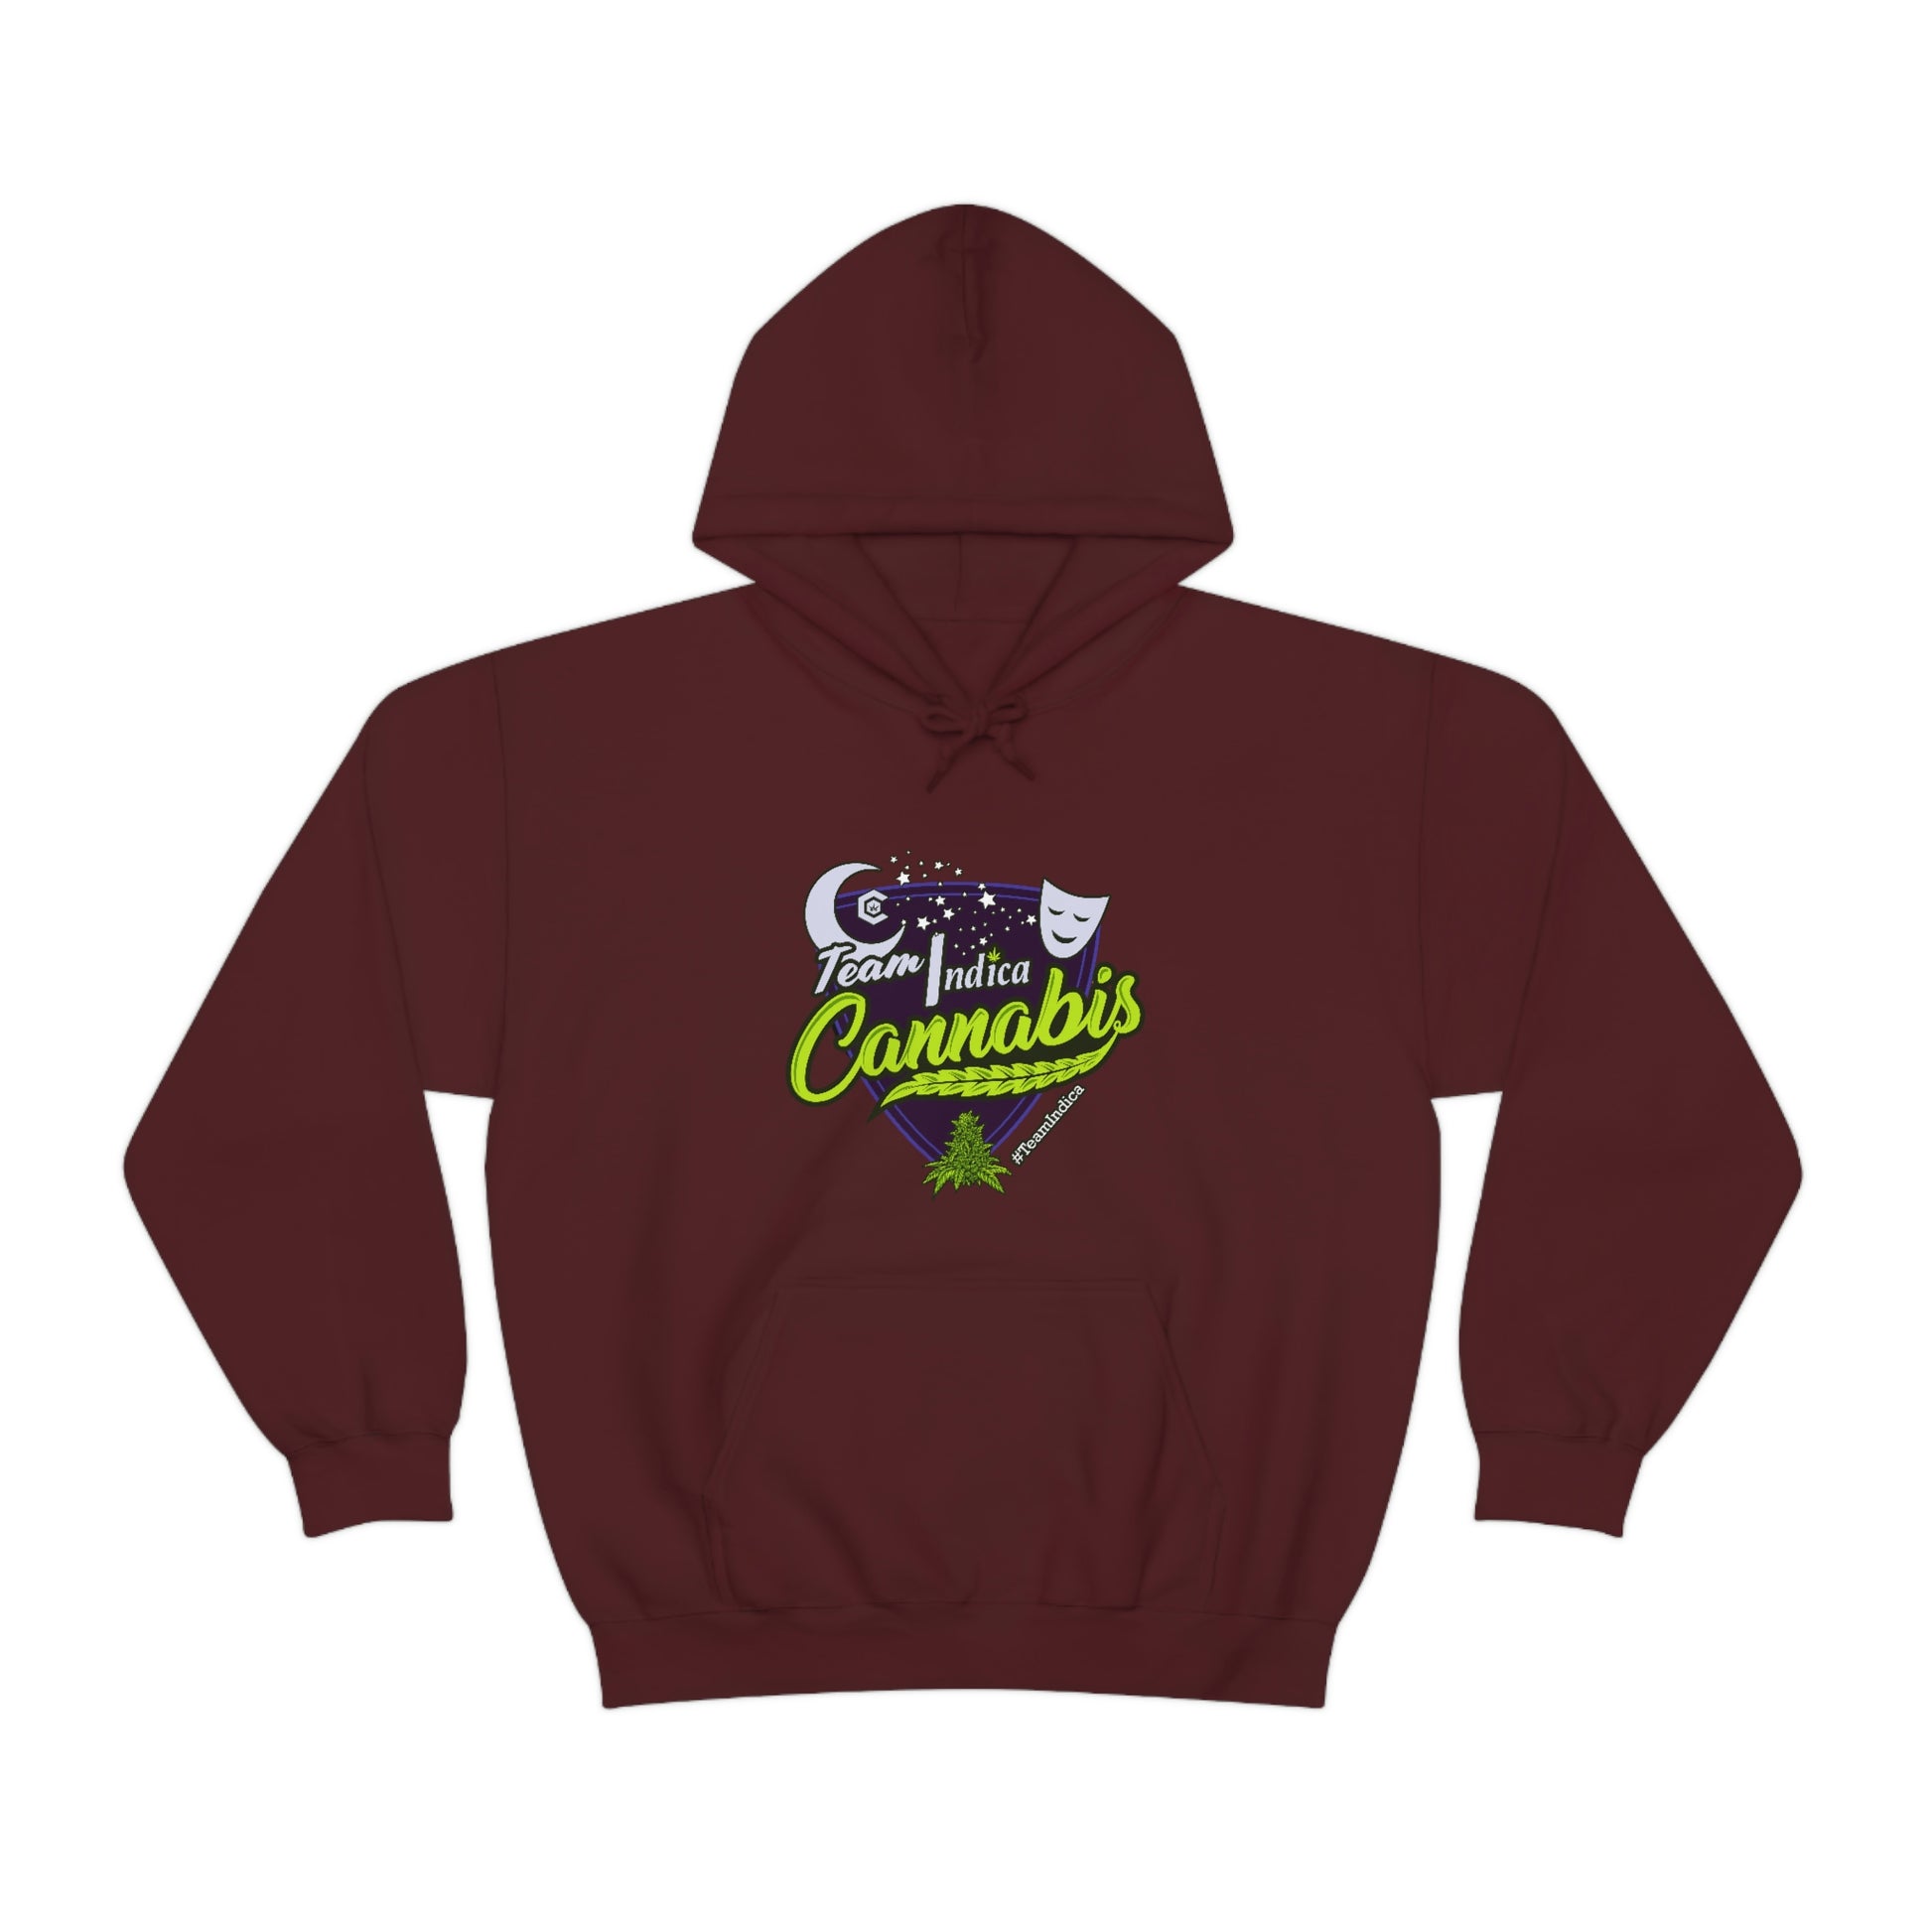 a Team Indica Cannabis Pullover with a green and purple logo.